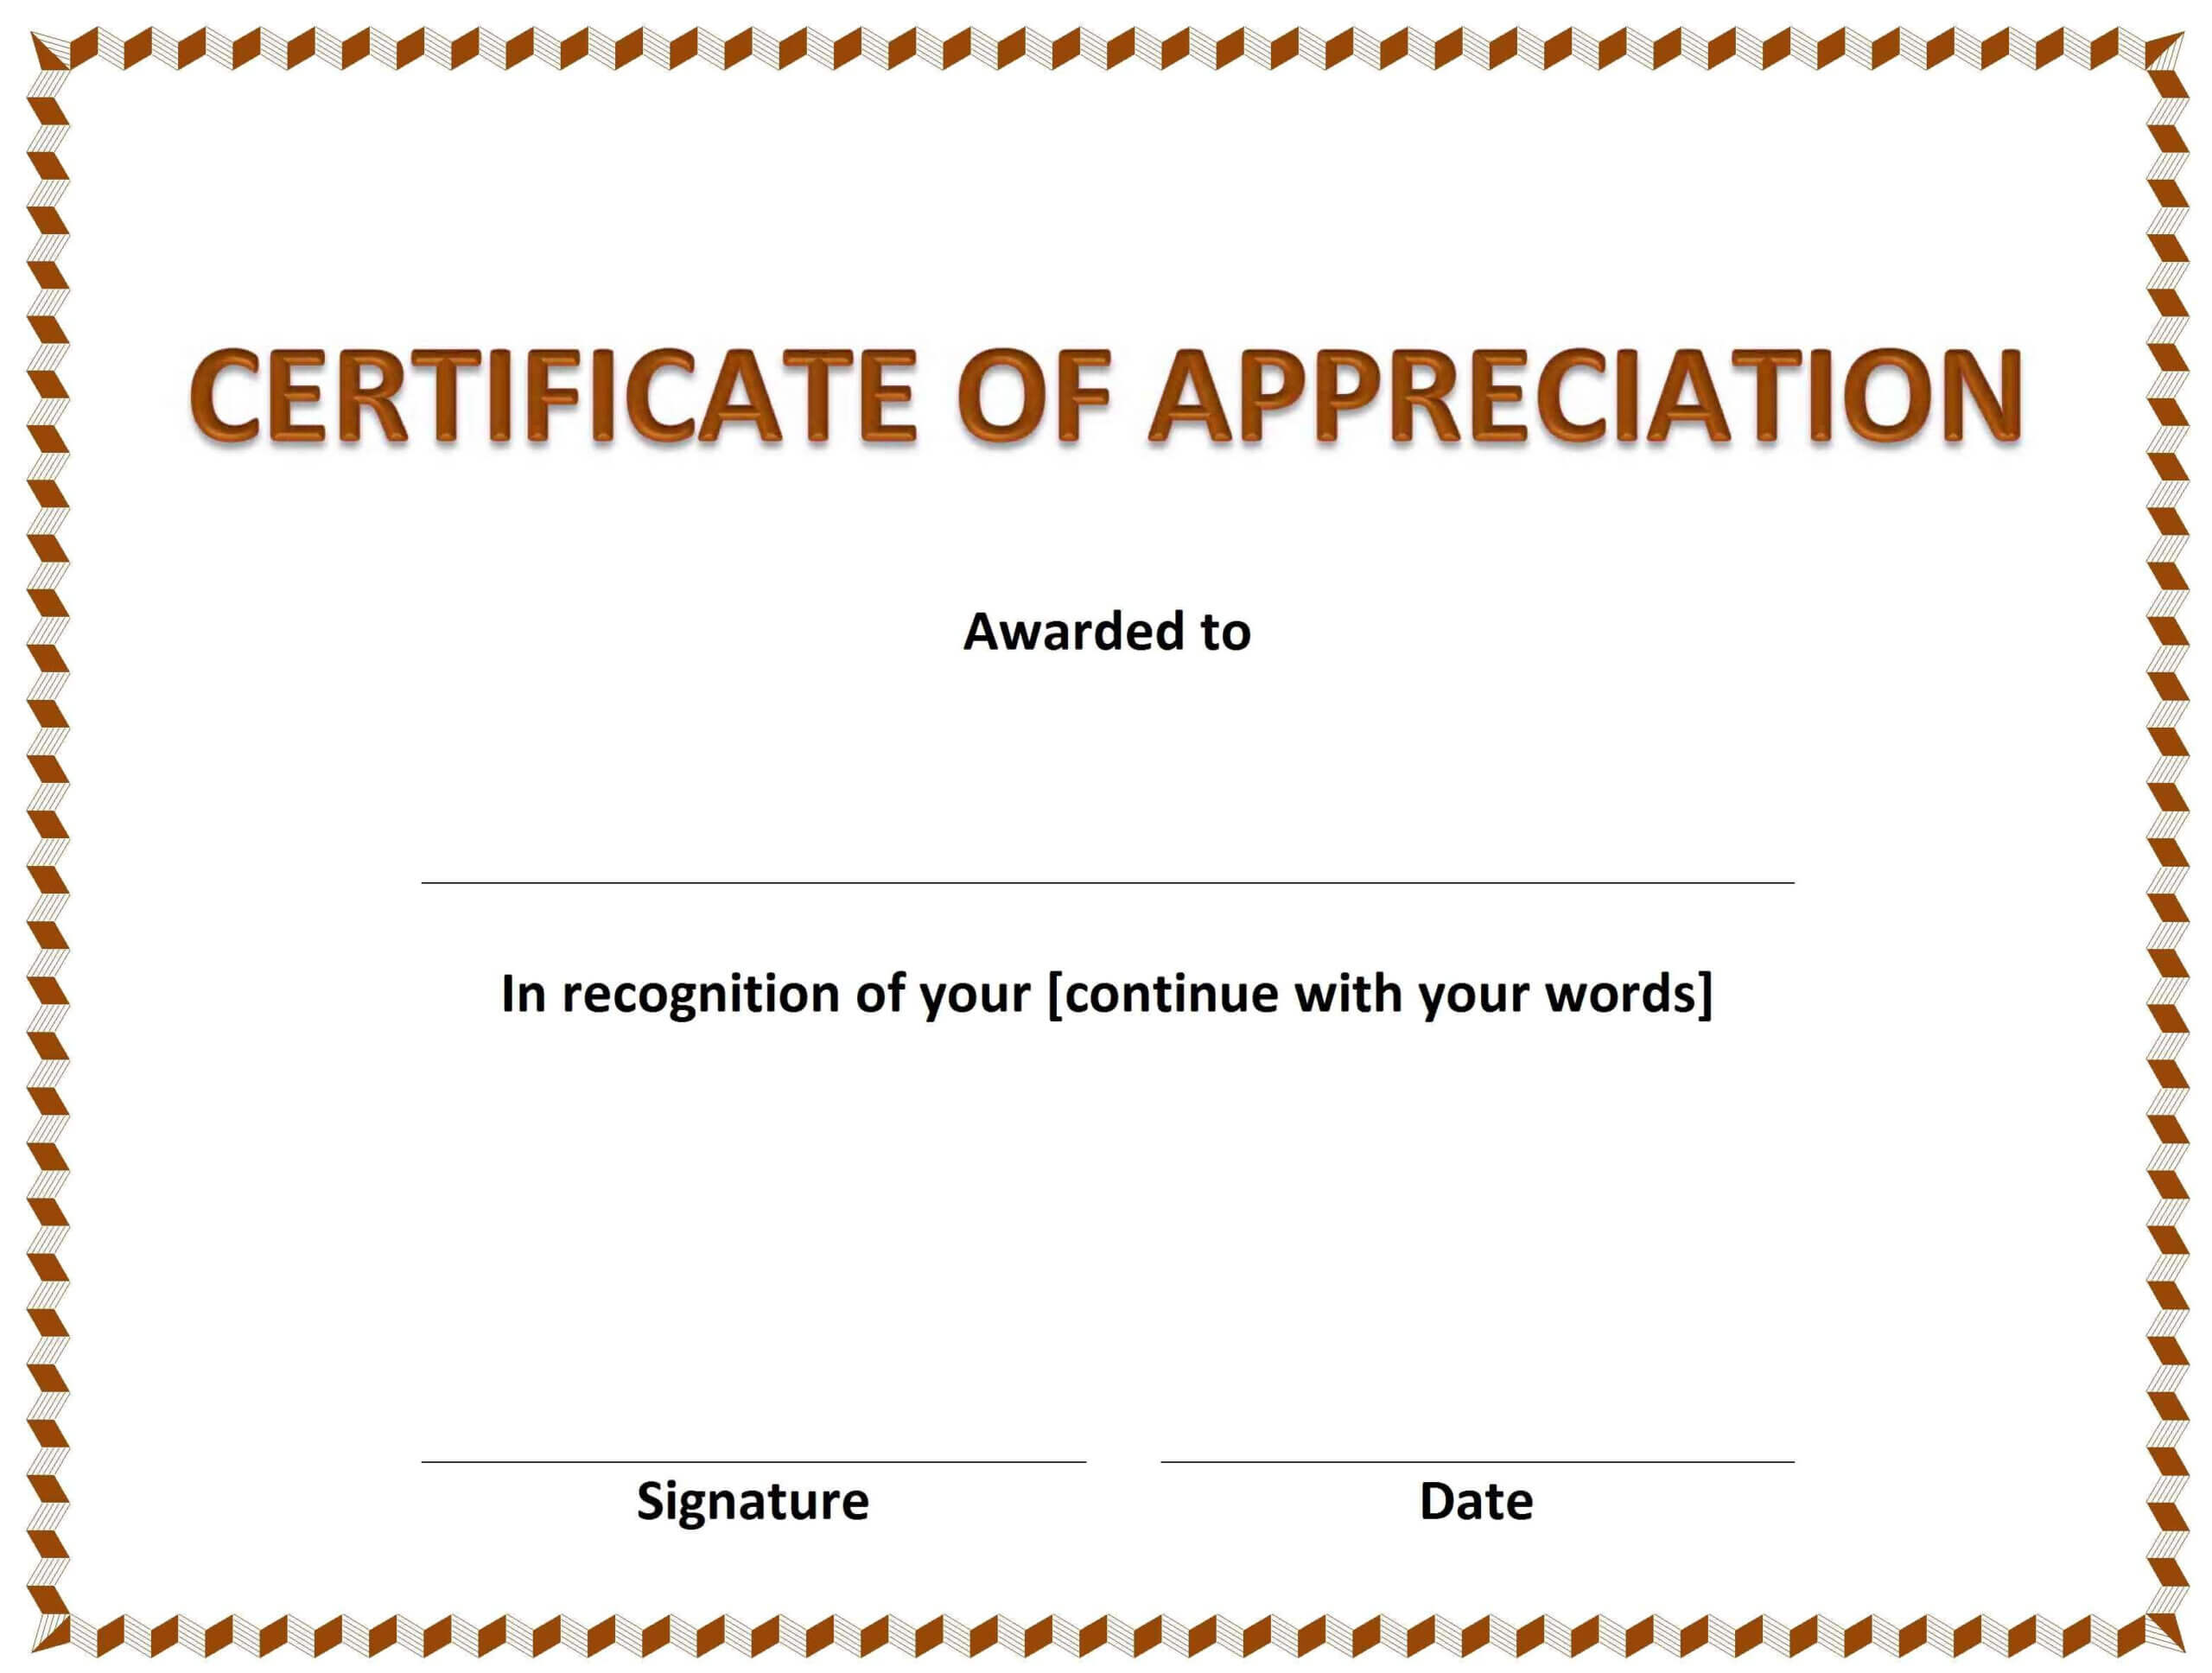 Template Certificate Of Appreciation Microsoft Word | Resume Throughout Template For Certificate Of Appreciation In Microsoft Word